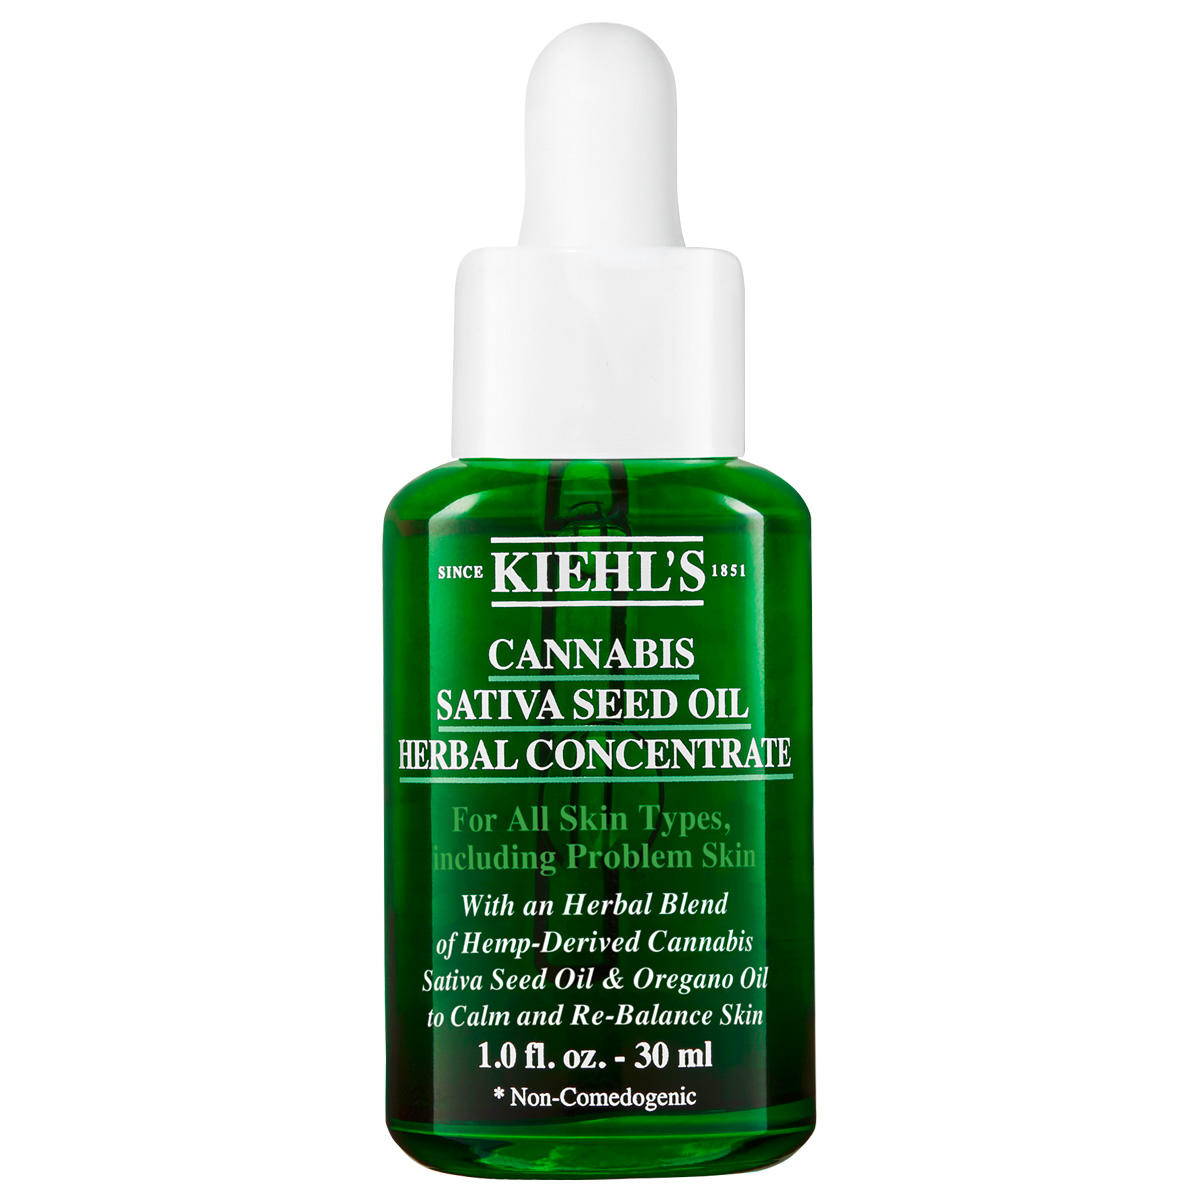 Kiehl's Cannabis Sativa Seed Oil Herbal Concentrate 30 ml - 1